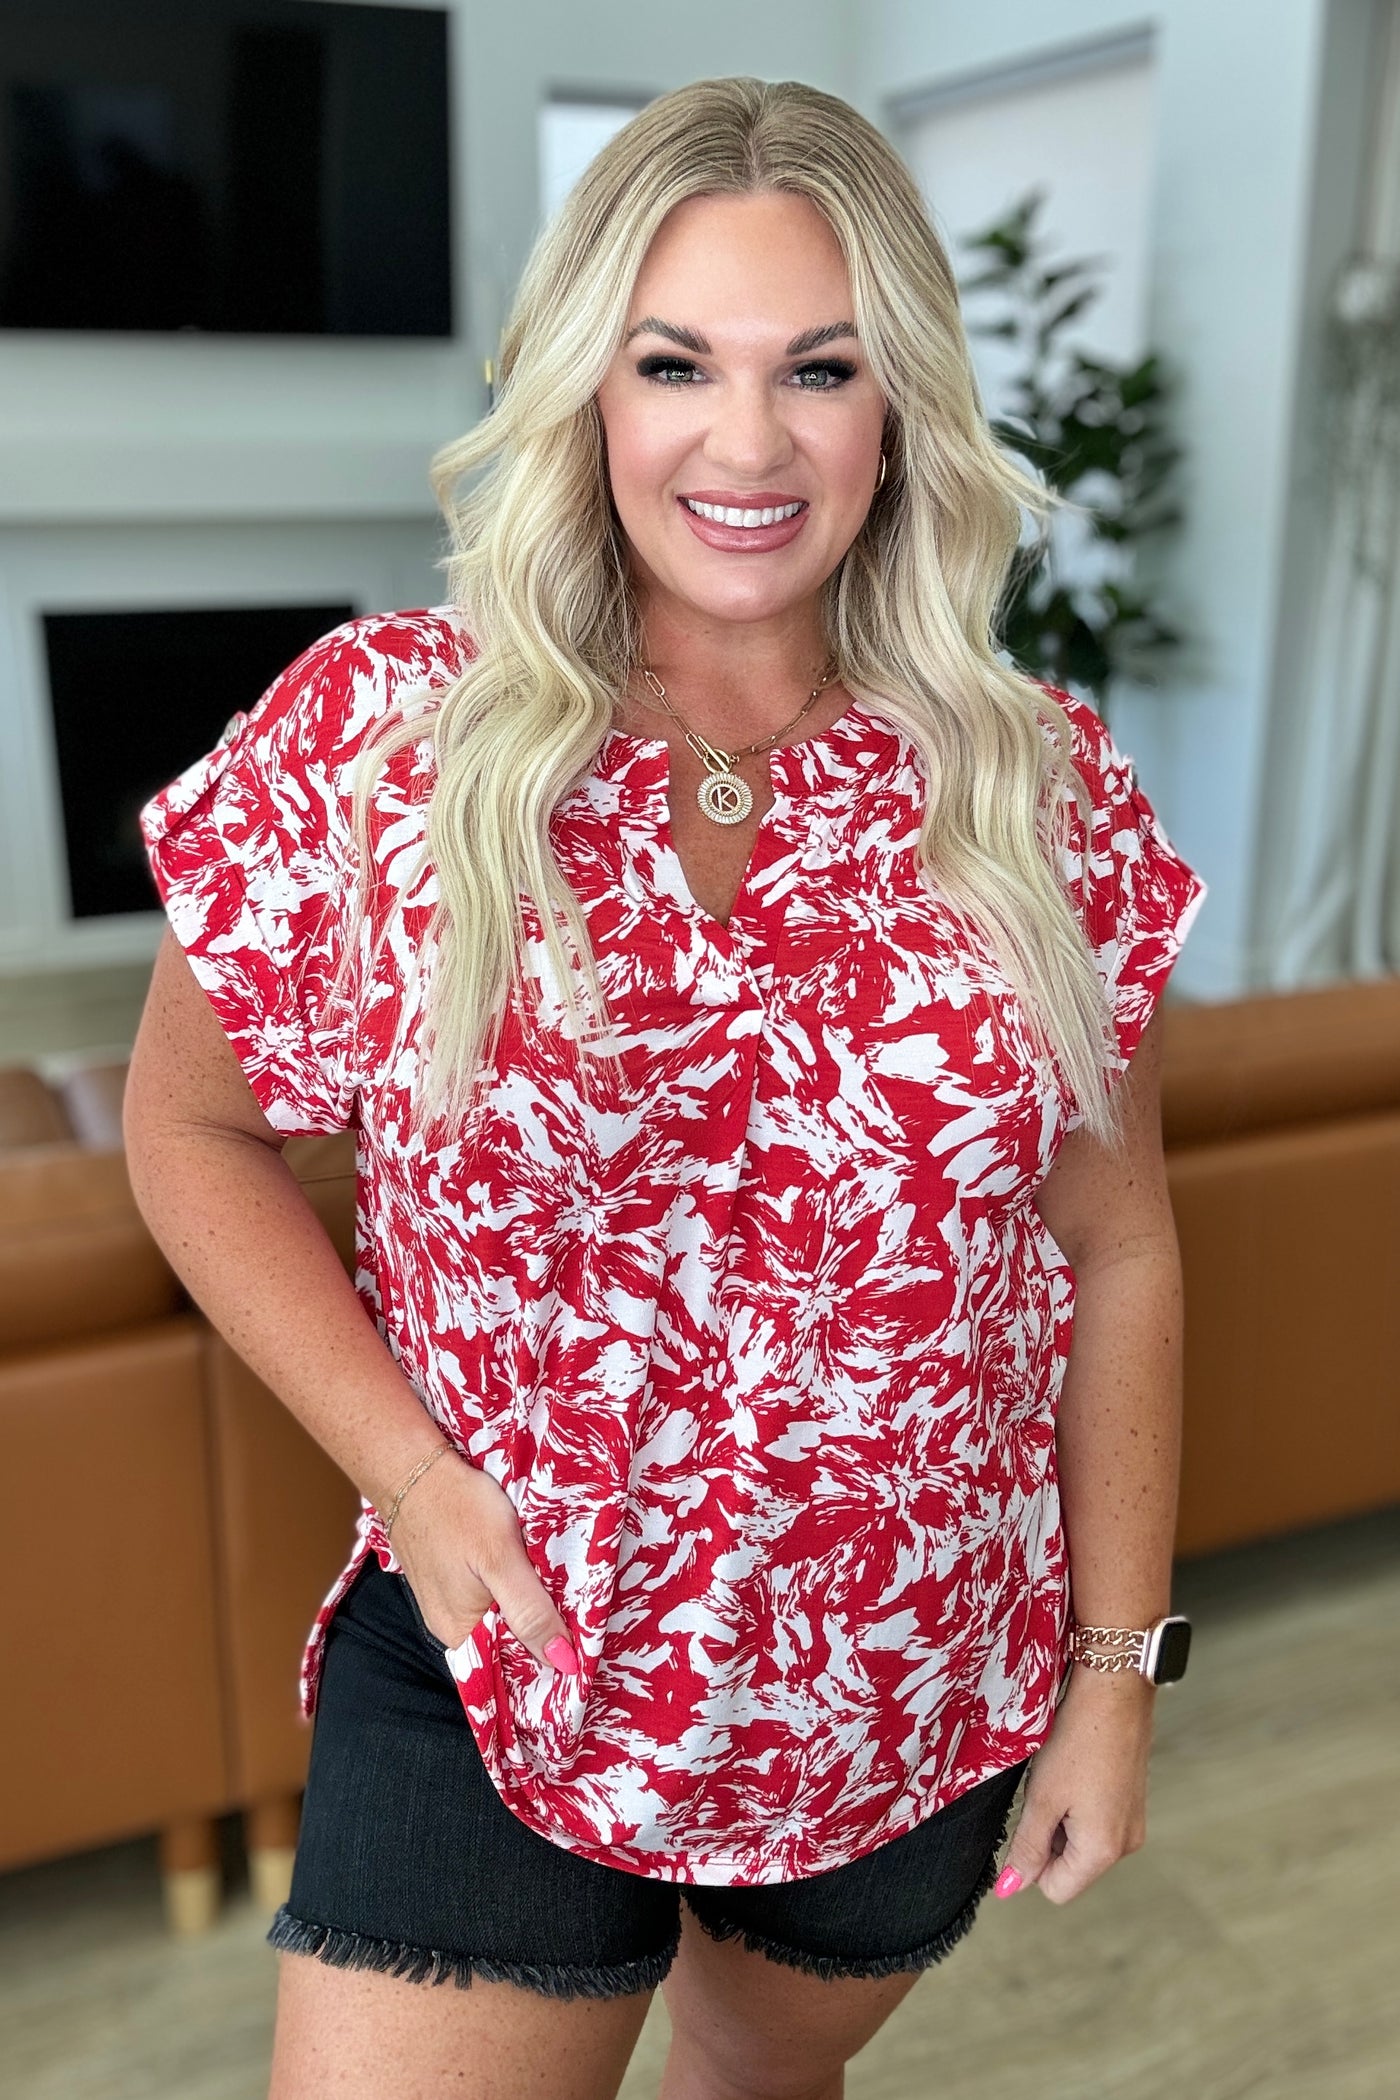 Lizzy Cap Sleeve Top in Red Floral - Small - 3XL